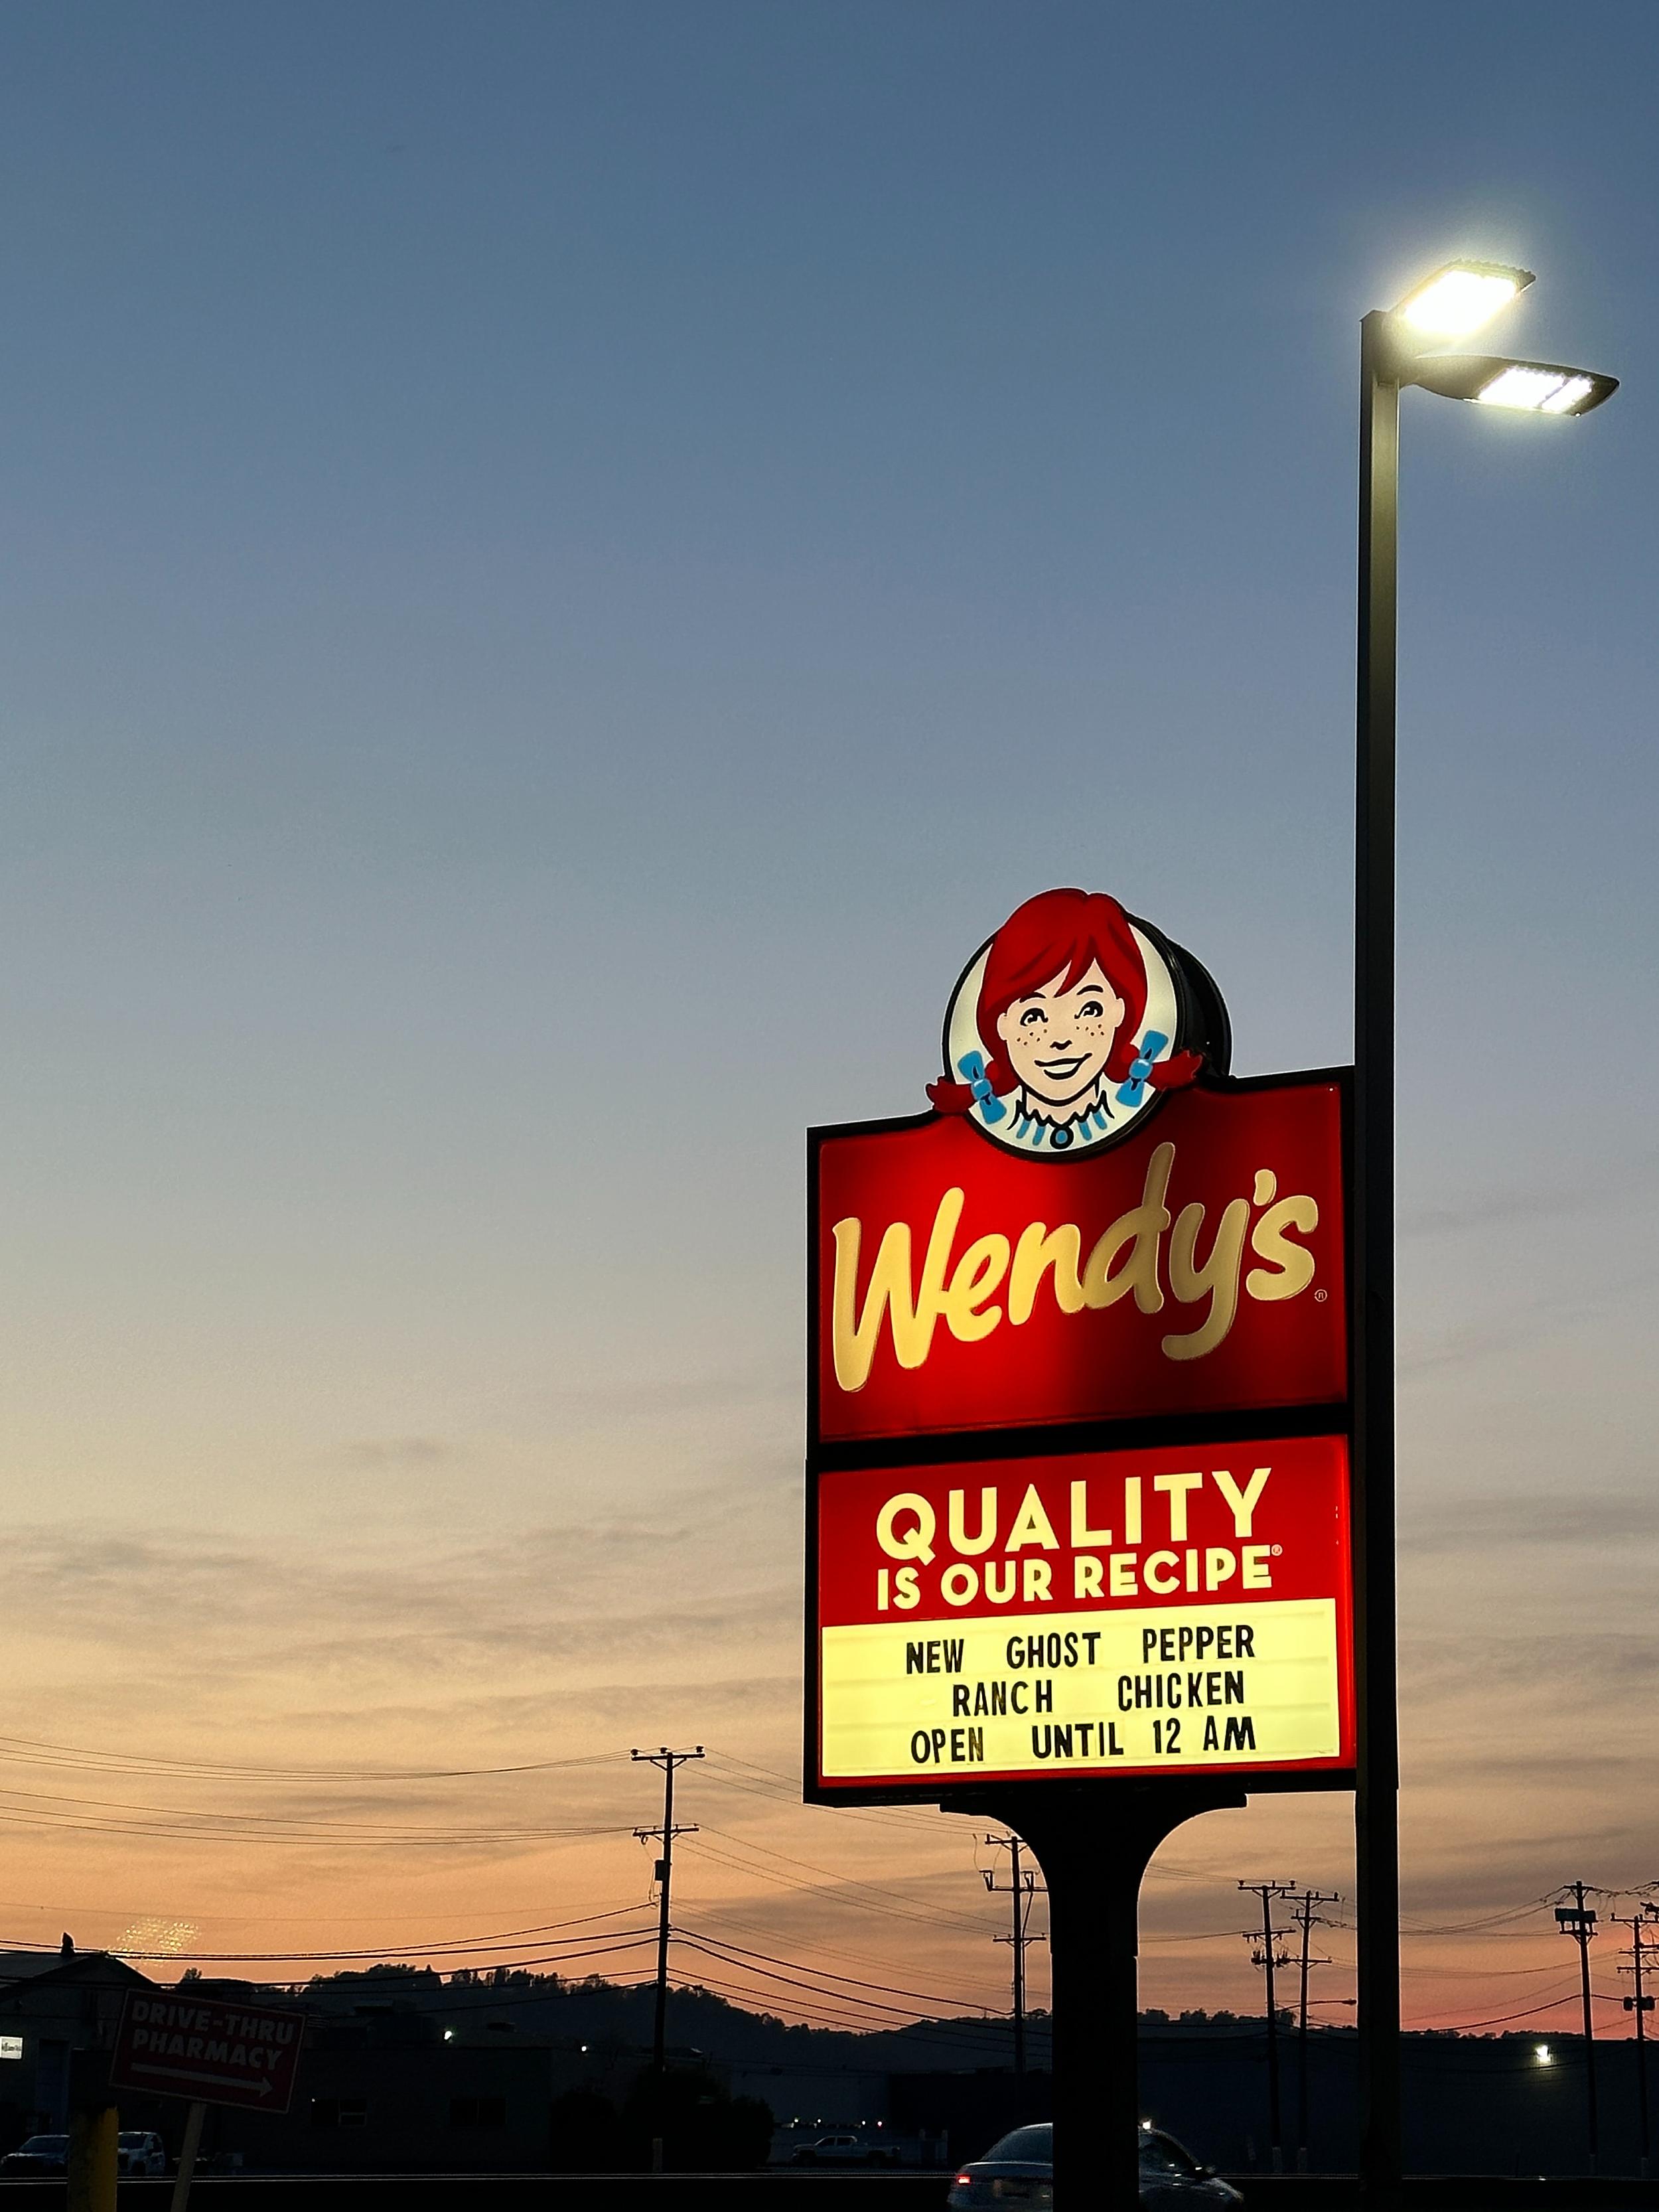 How to get a Wendy's Jr Bacon Cheeseburger for just 1 cent this week